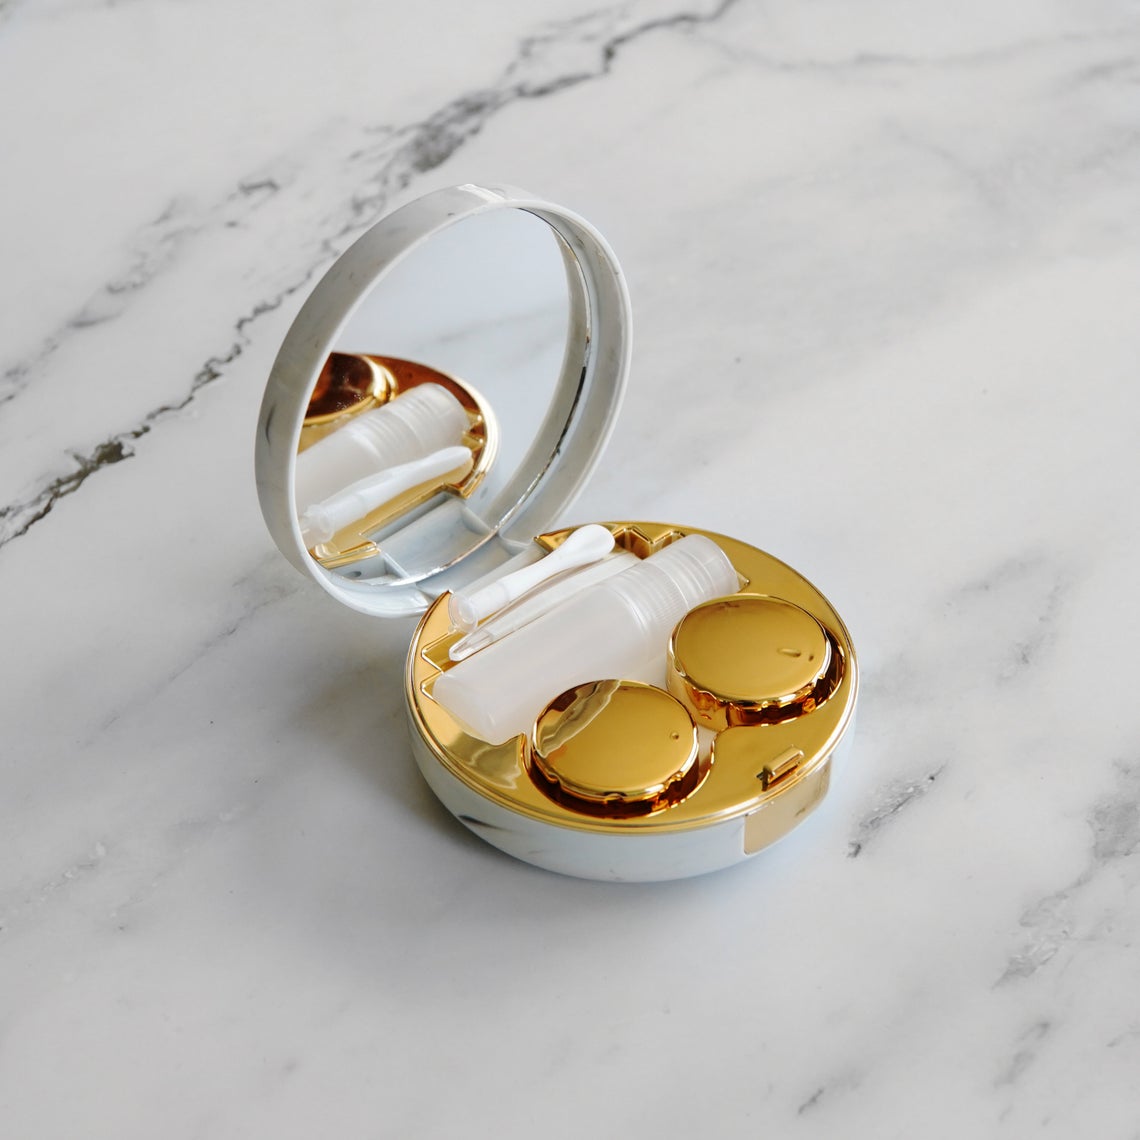 Marble Compact